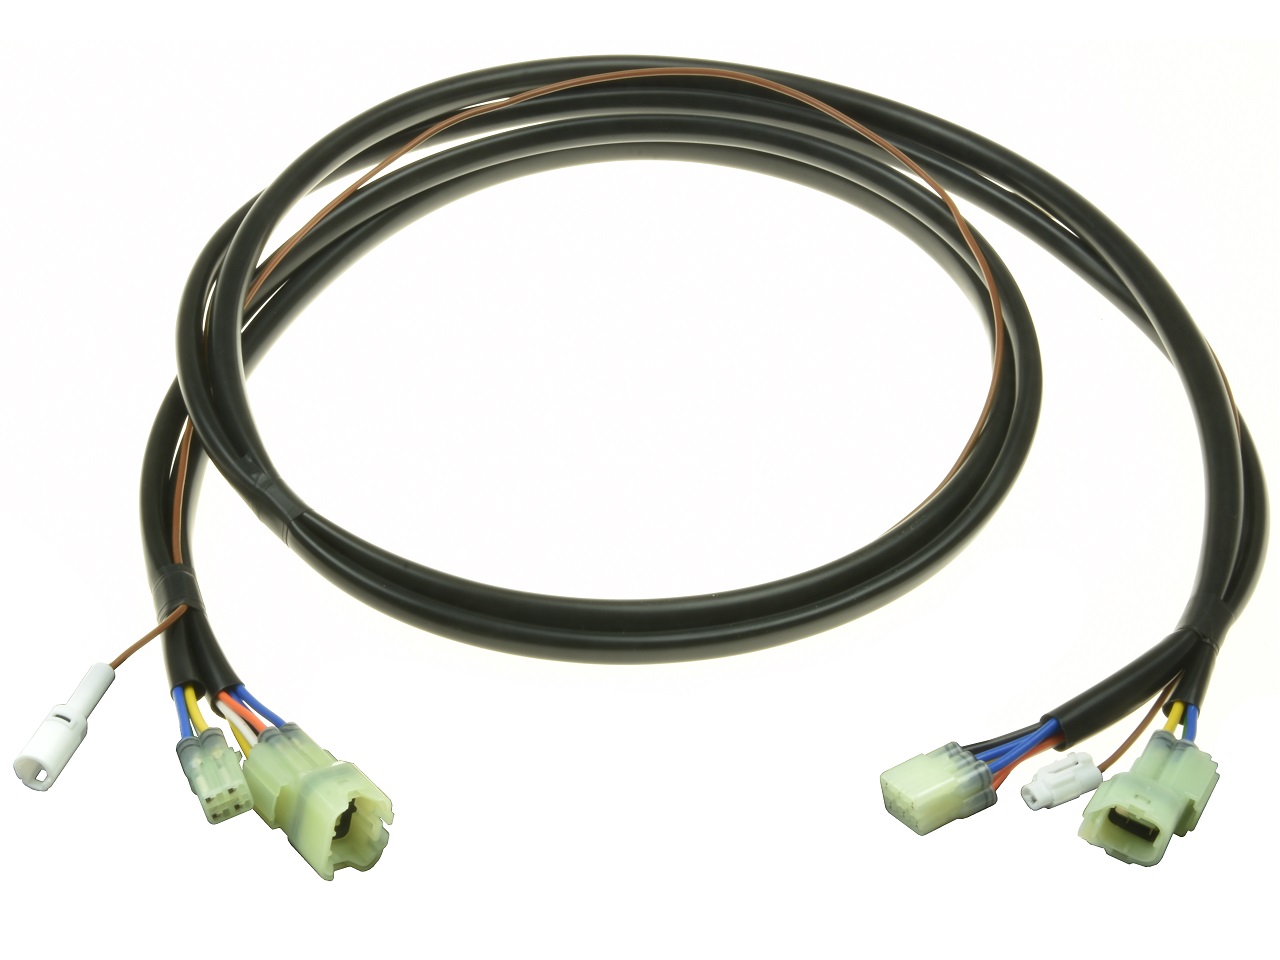 Rotax 912 CDI ignition module unit extension cable, wiring harness 966-721 - Click Image to Close